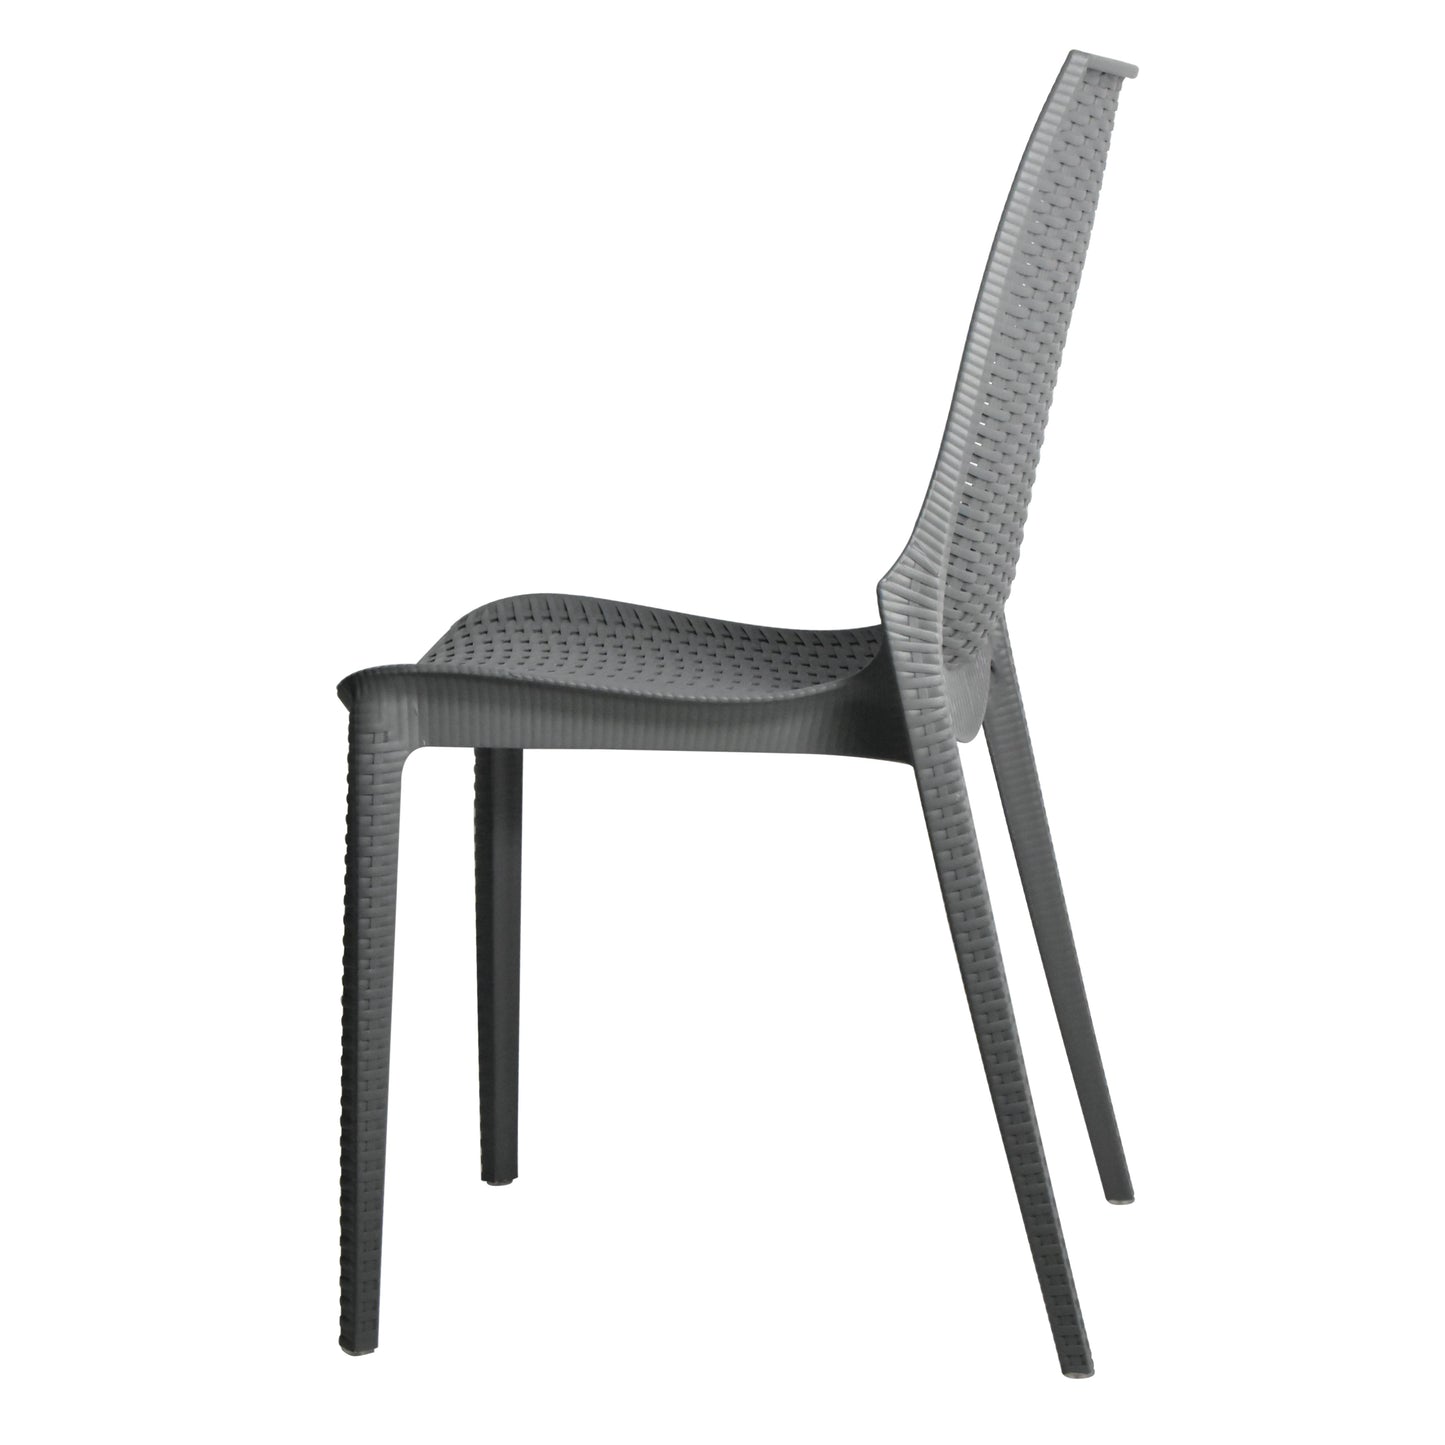 Anders Outdoor Patio Plastic Dining Chair - Set of 2